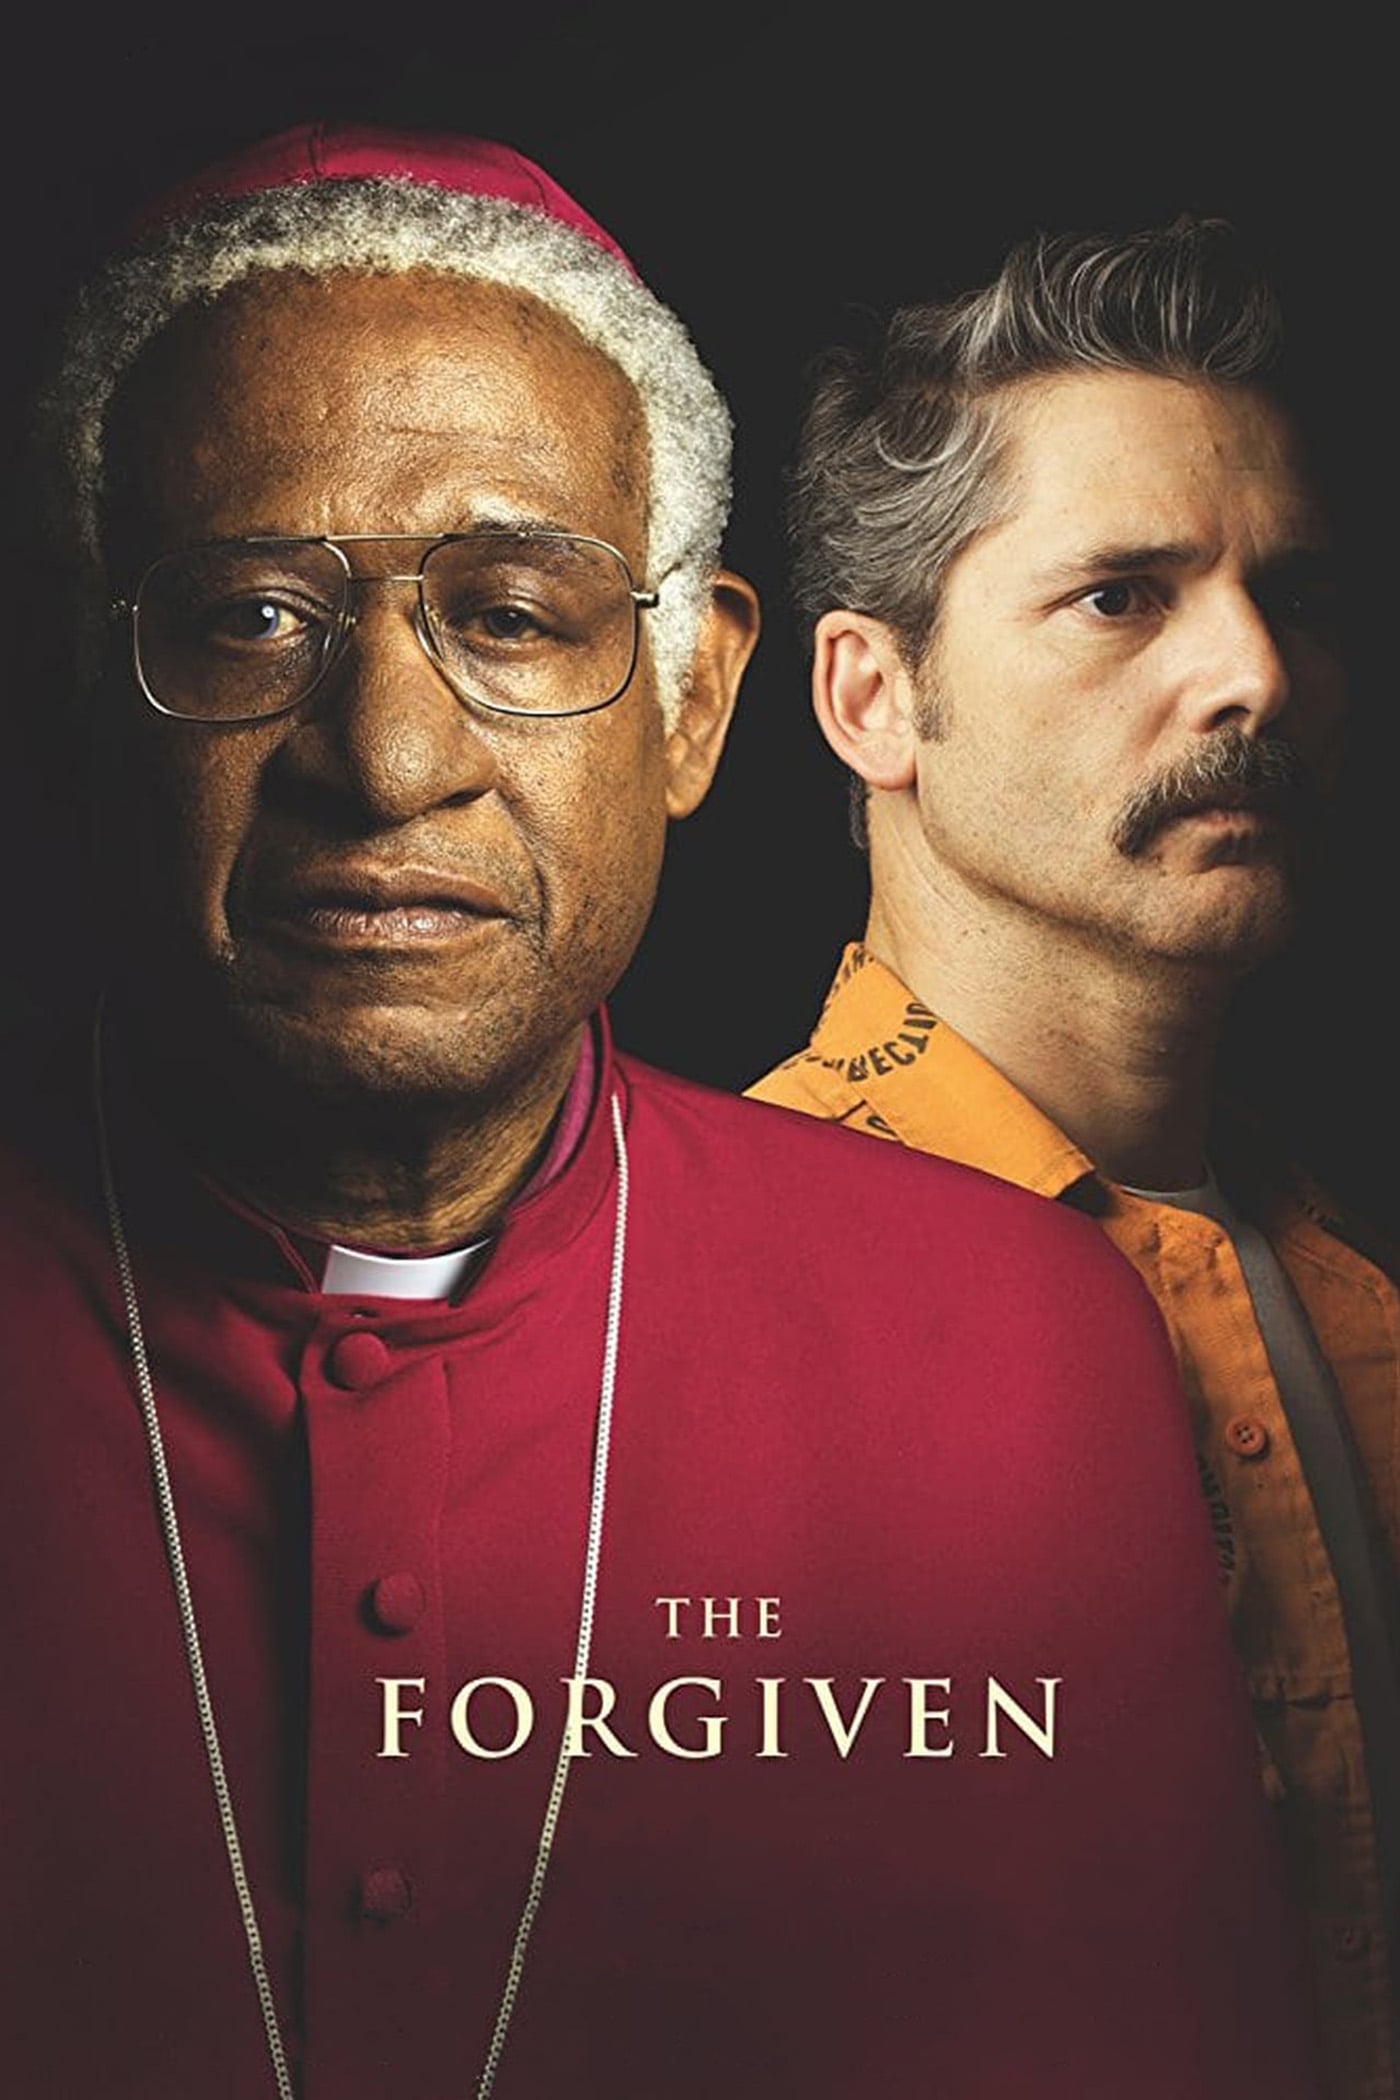 The Forgiven (2018)